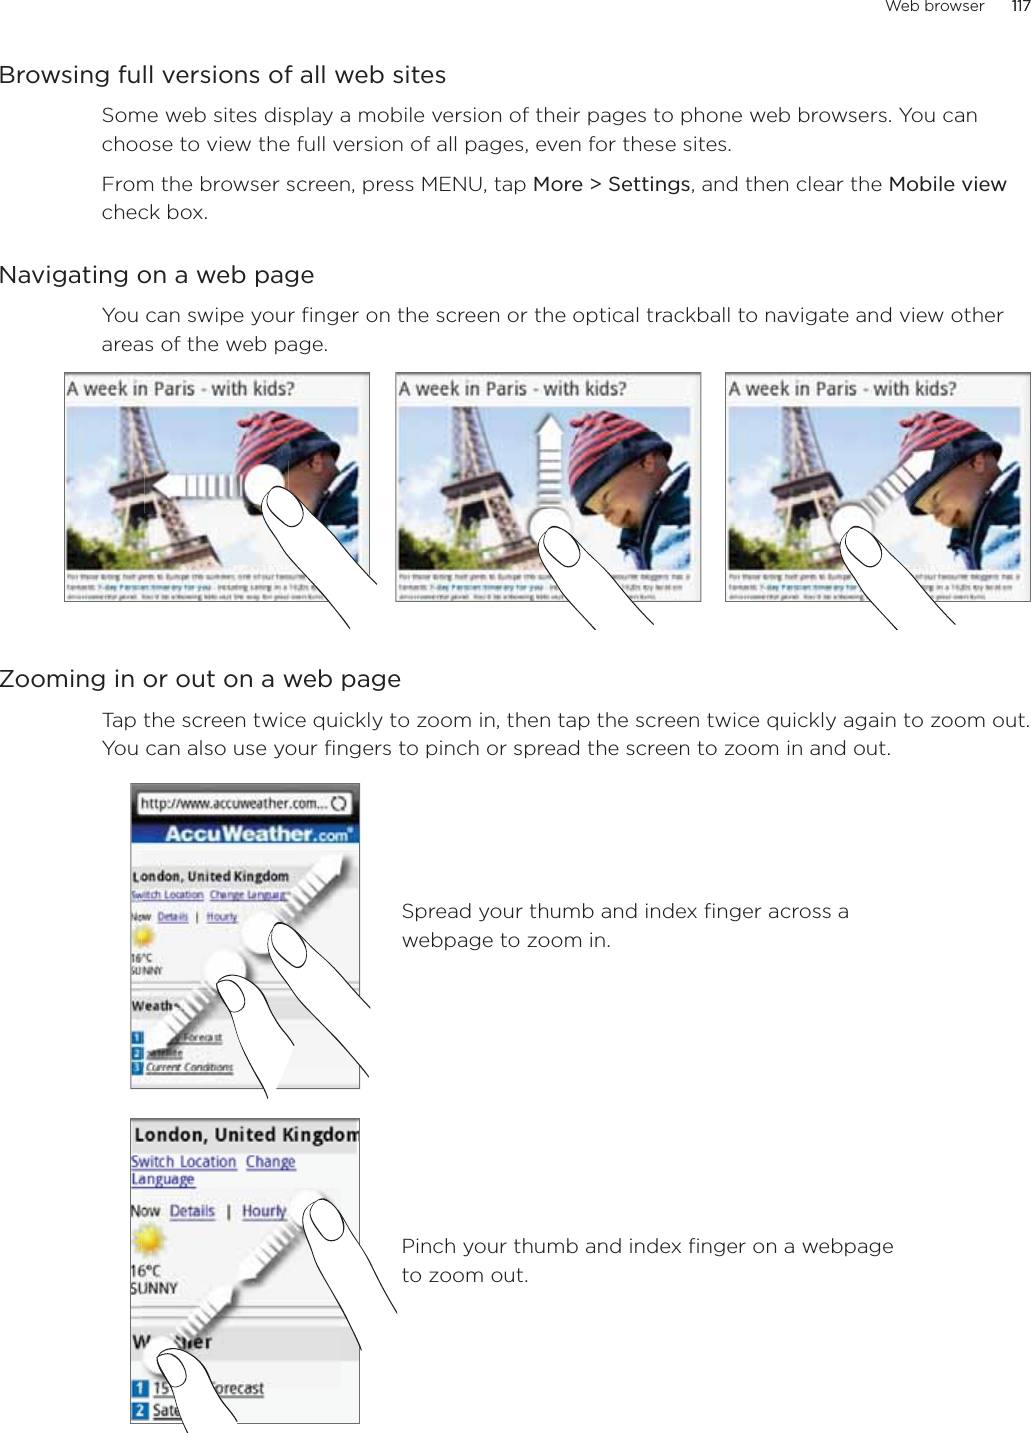 Web browser 117      117Browsing full versions of all web sitesSome web sites display a mobile version of their pages to phone web browsers. You can choose to view the full version of all pages, even for these sites.From the browser screen, press MENU, tap More &gt; Settings, and then clear the Mobile view check box. Navigating on a web pageYou can swipe your finger on the screen or the optical trackball to navigate and view other areas of the web page.Zooming in or out on a web pageTap the screen twice quickly to zoom in, then tap the screen twice quickly again to zoom out. You can also use your fingers to pinch or spread the screen to zoom in and out.Spread your thumb and index finger across a webpage to zoom in.Pinch your thumb and index finger on a webpage to zoom out.